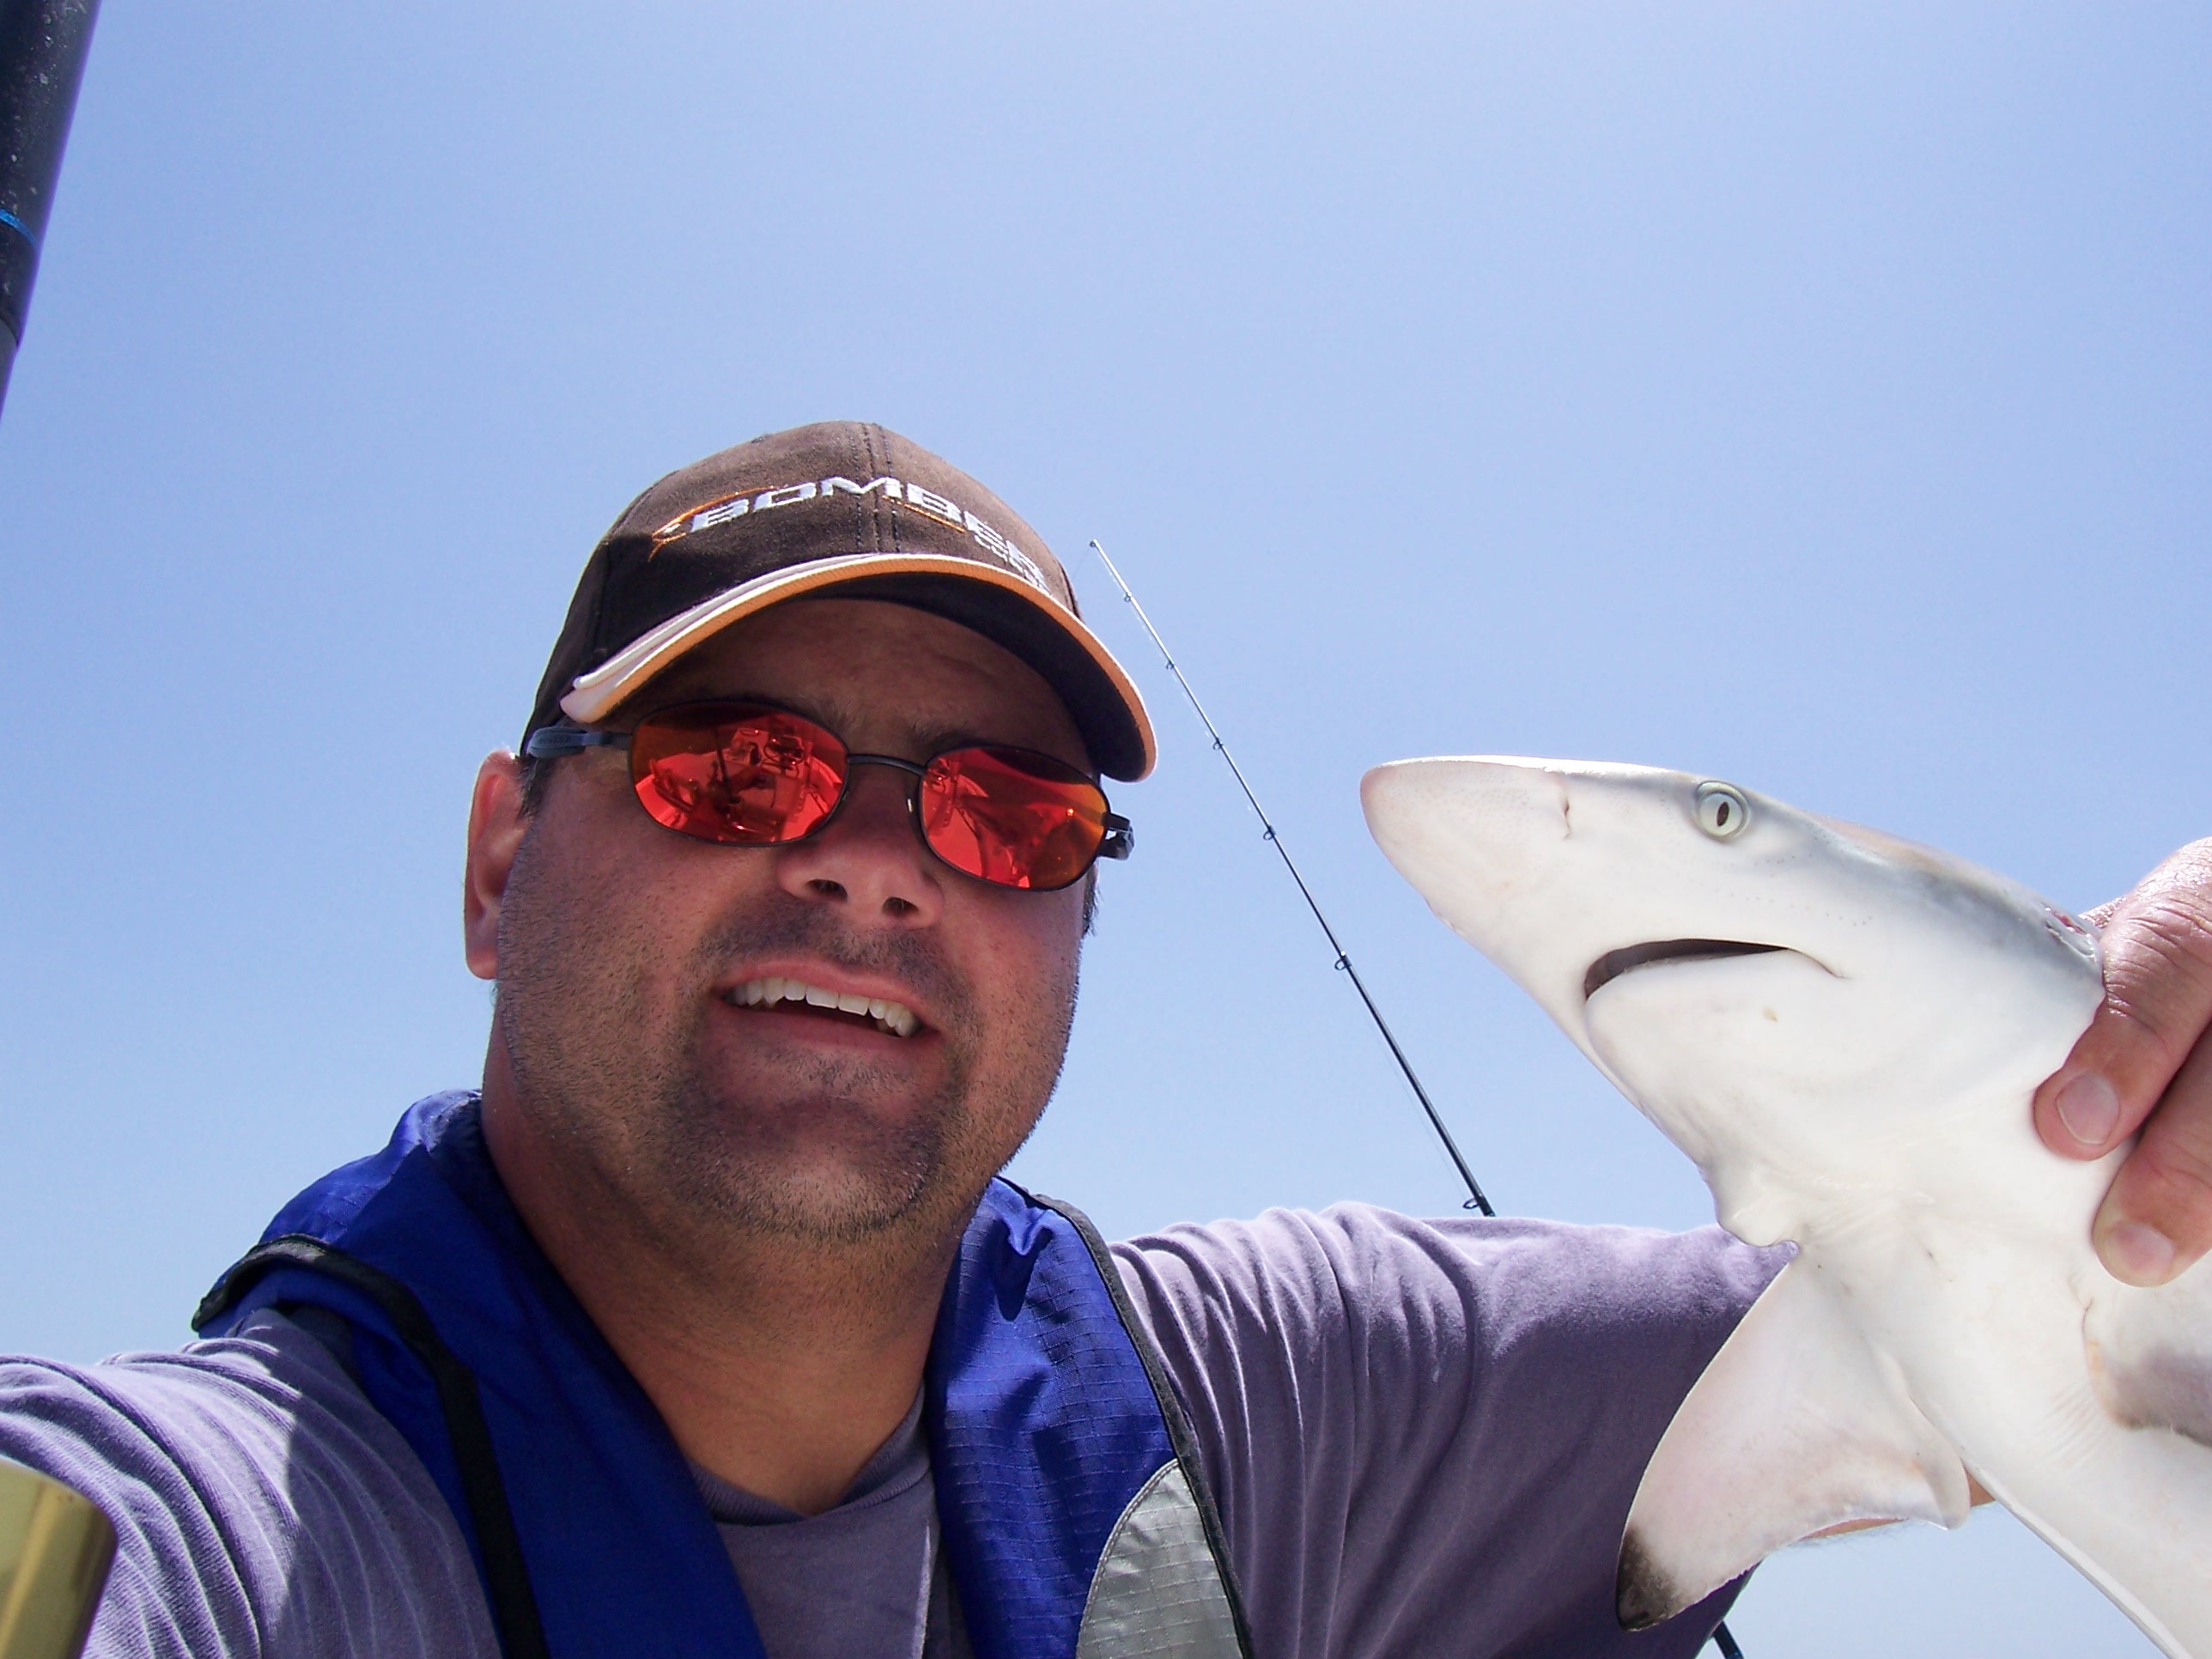 *Playing with sharks while pre-fishing for an event in South Texas!!